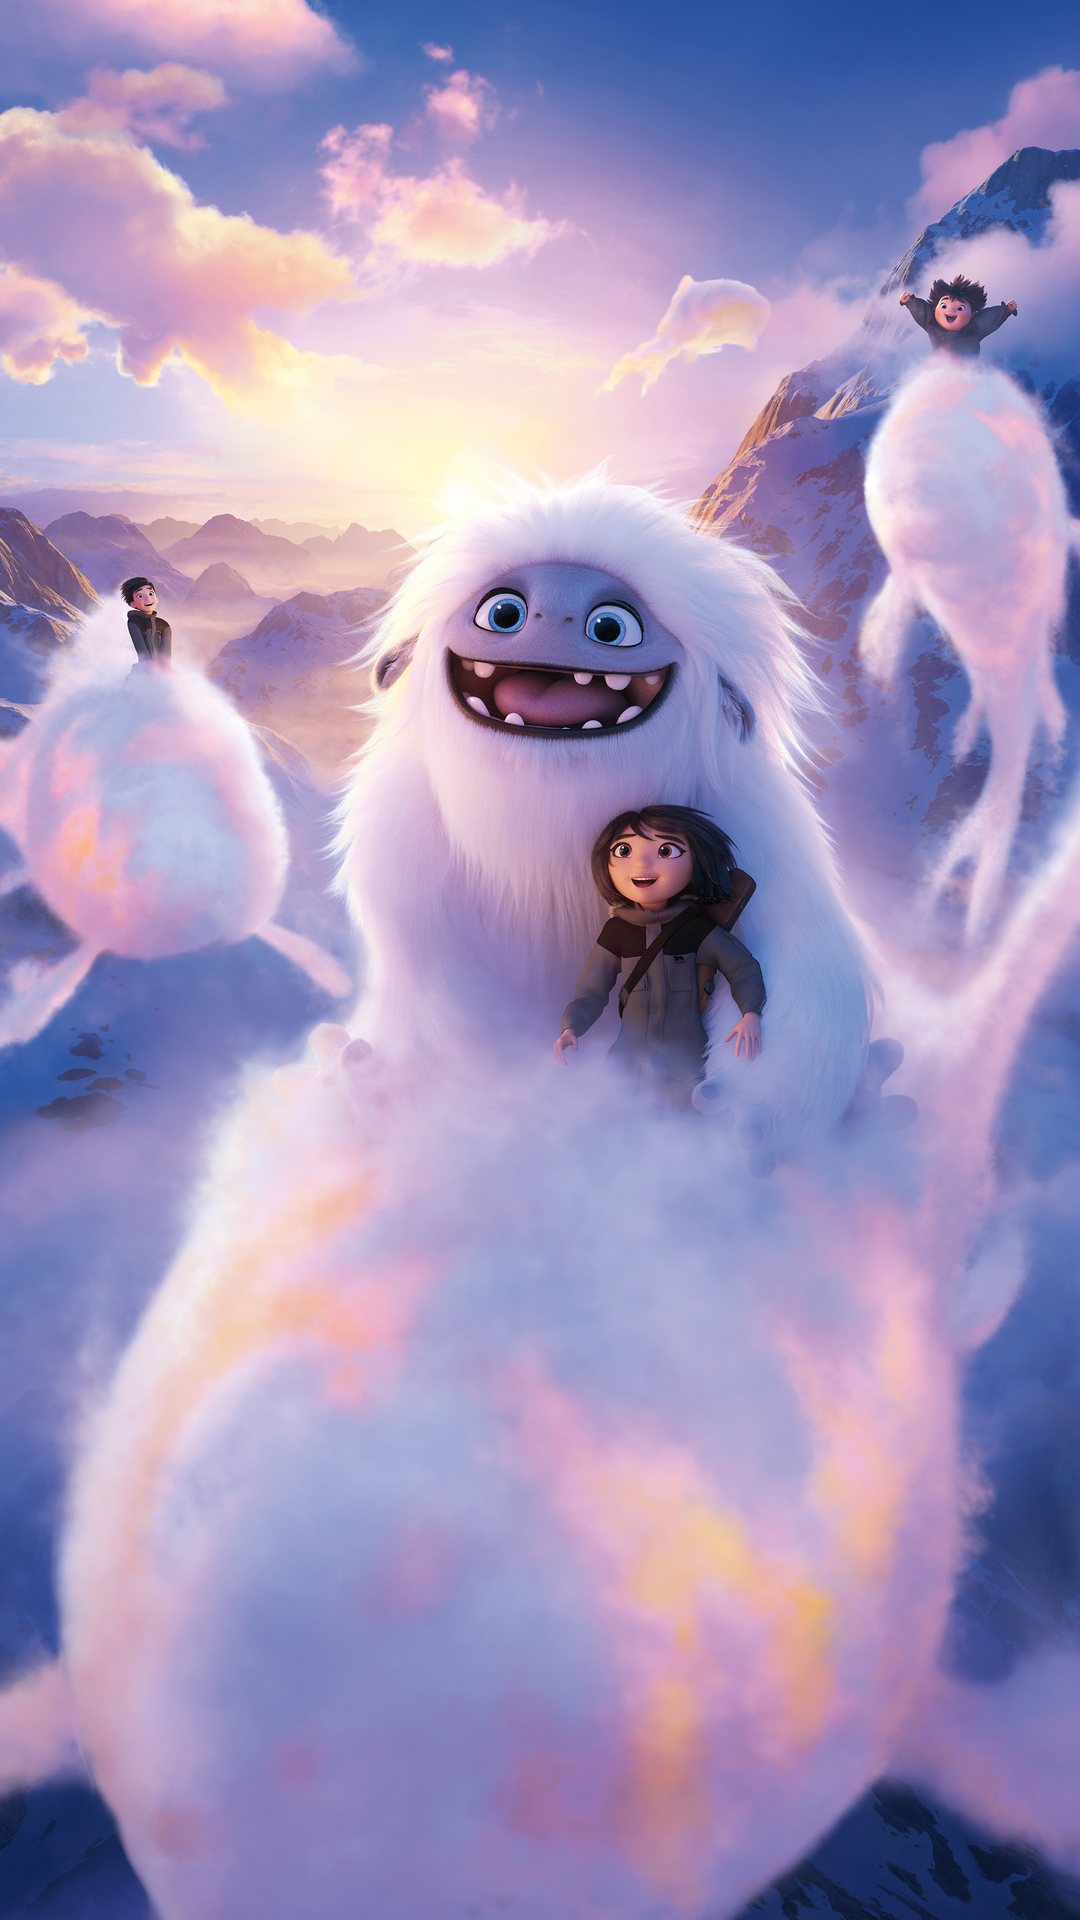 1080x1920 abominable, 2019 movies, animated movies, hd, 8k for iPhone 8 wallpaper